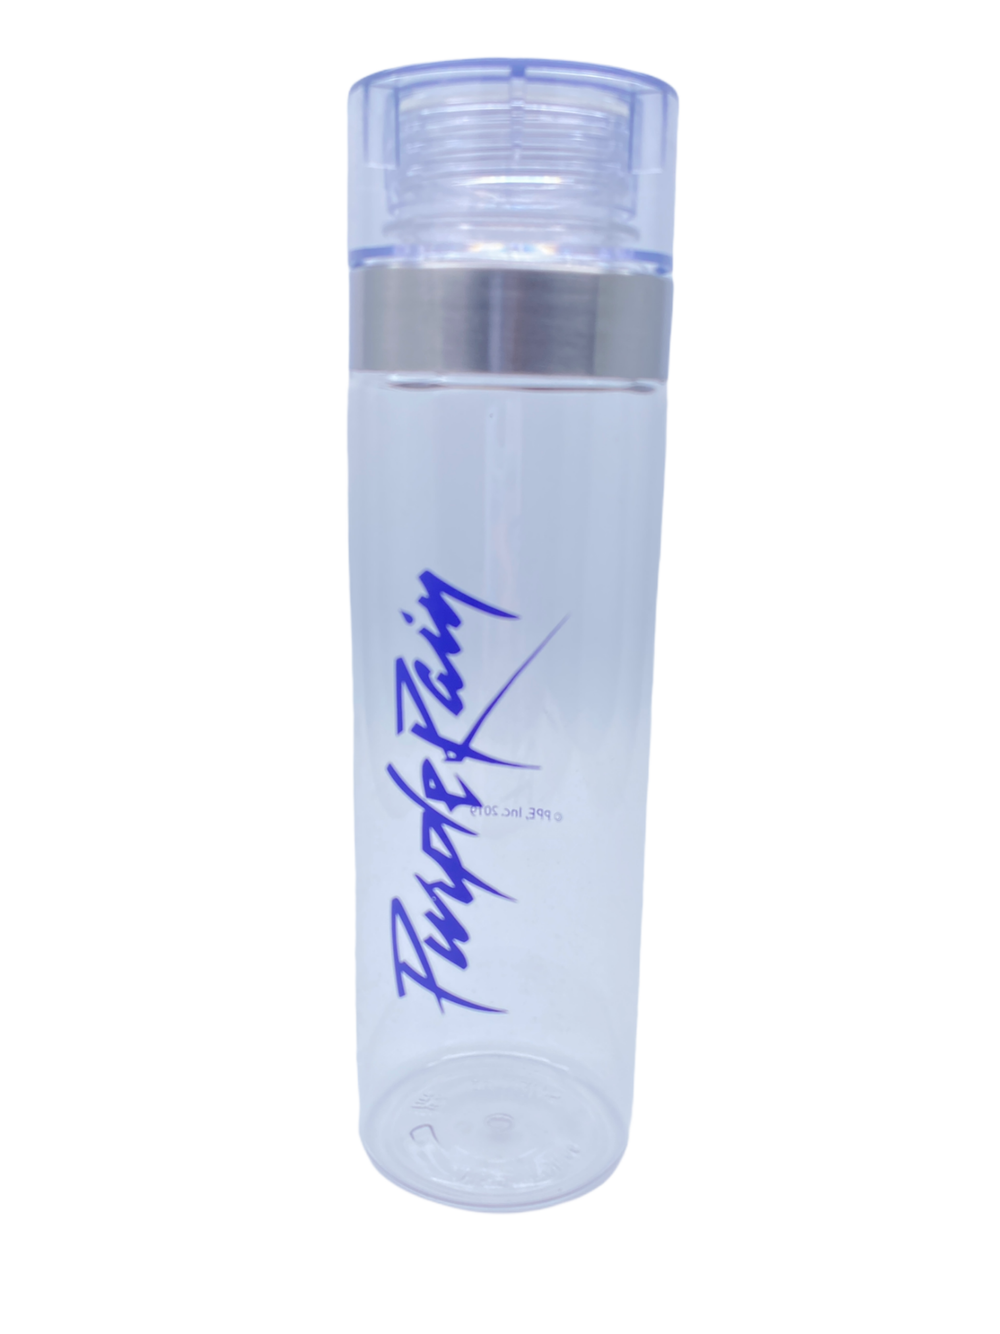 Prince – Official Drinks Bottle Clear Plastic BPA Free Purple Rain Brand New